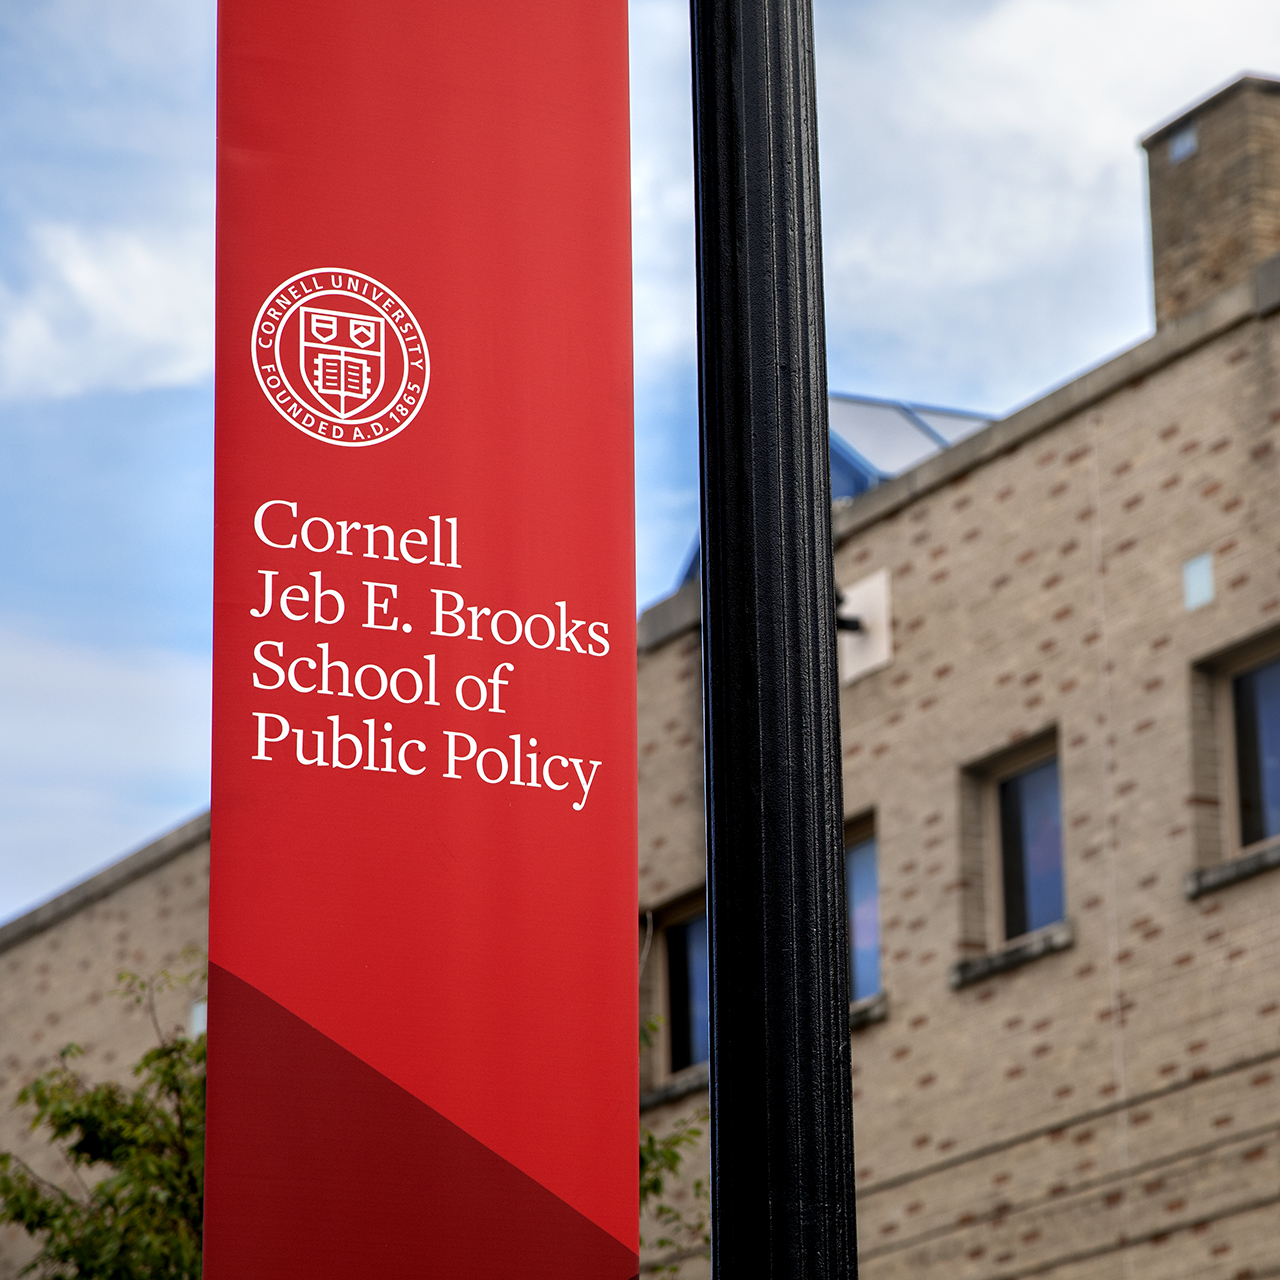 Red lamppost banner for the Jeb E. Brooks School of Public Policy.